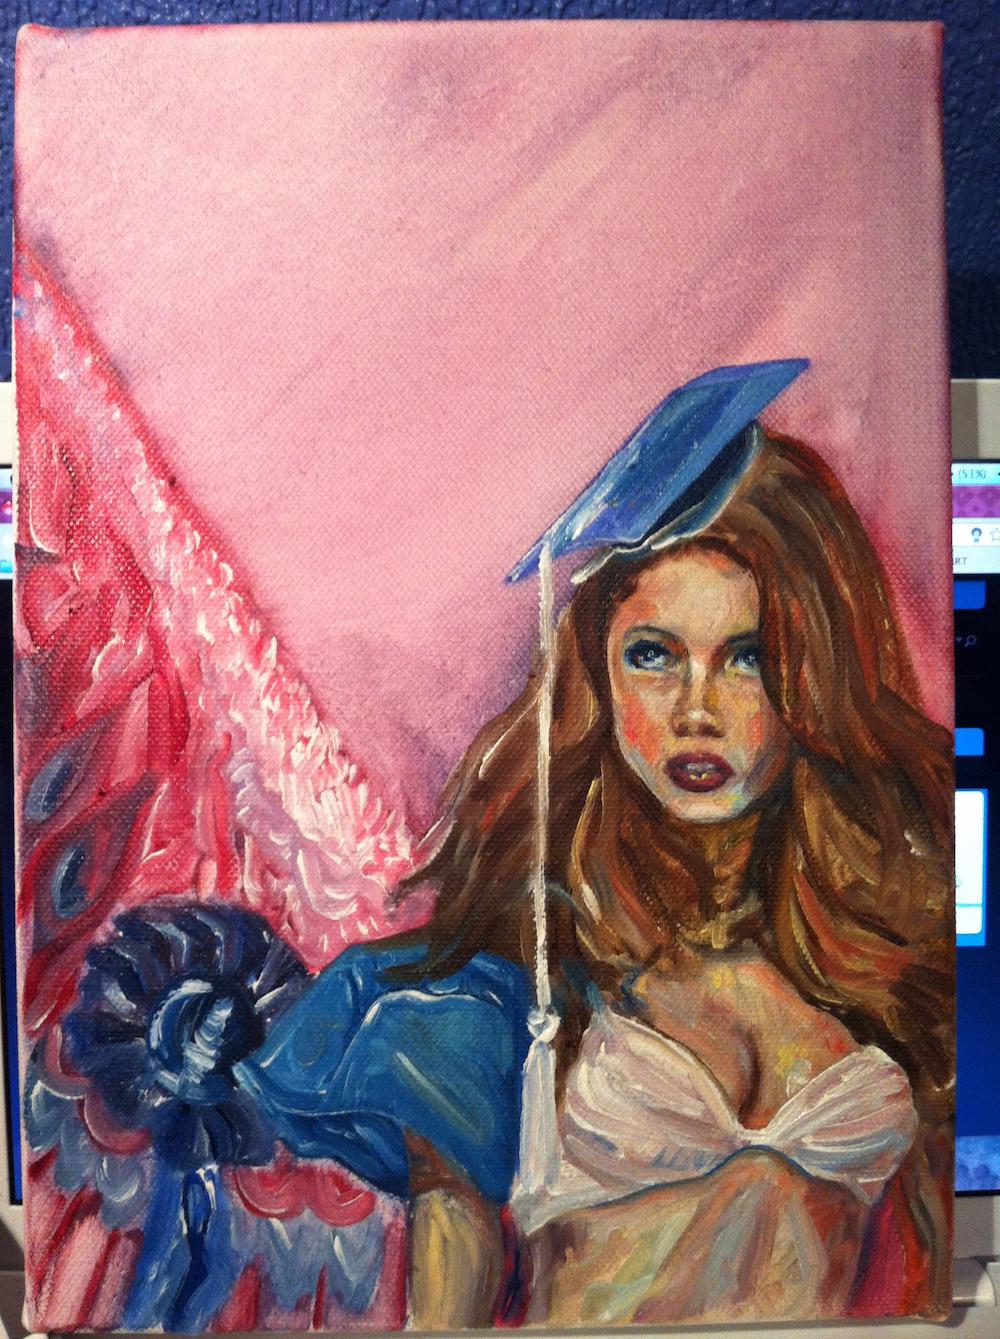 a painting of a victoria's secret angel wearing a university graduation cap, which i think I painted for a friend when we were leaving school